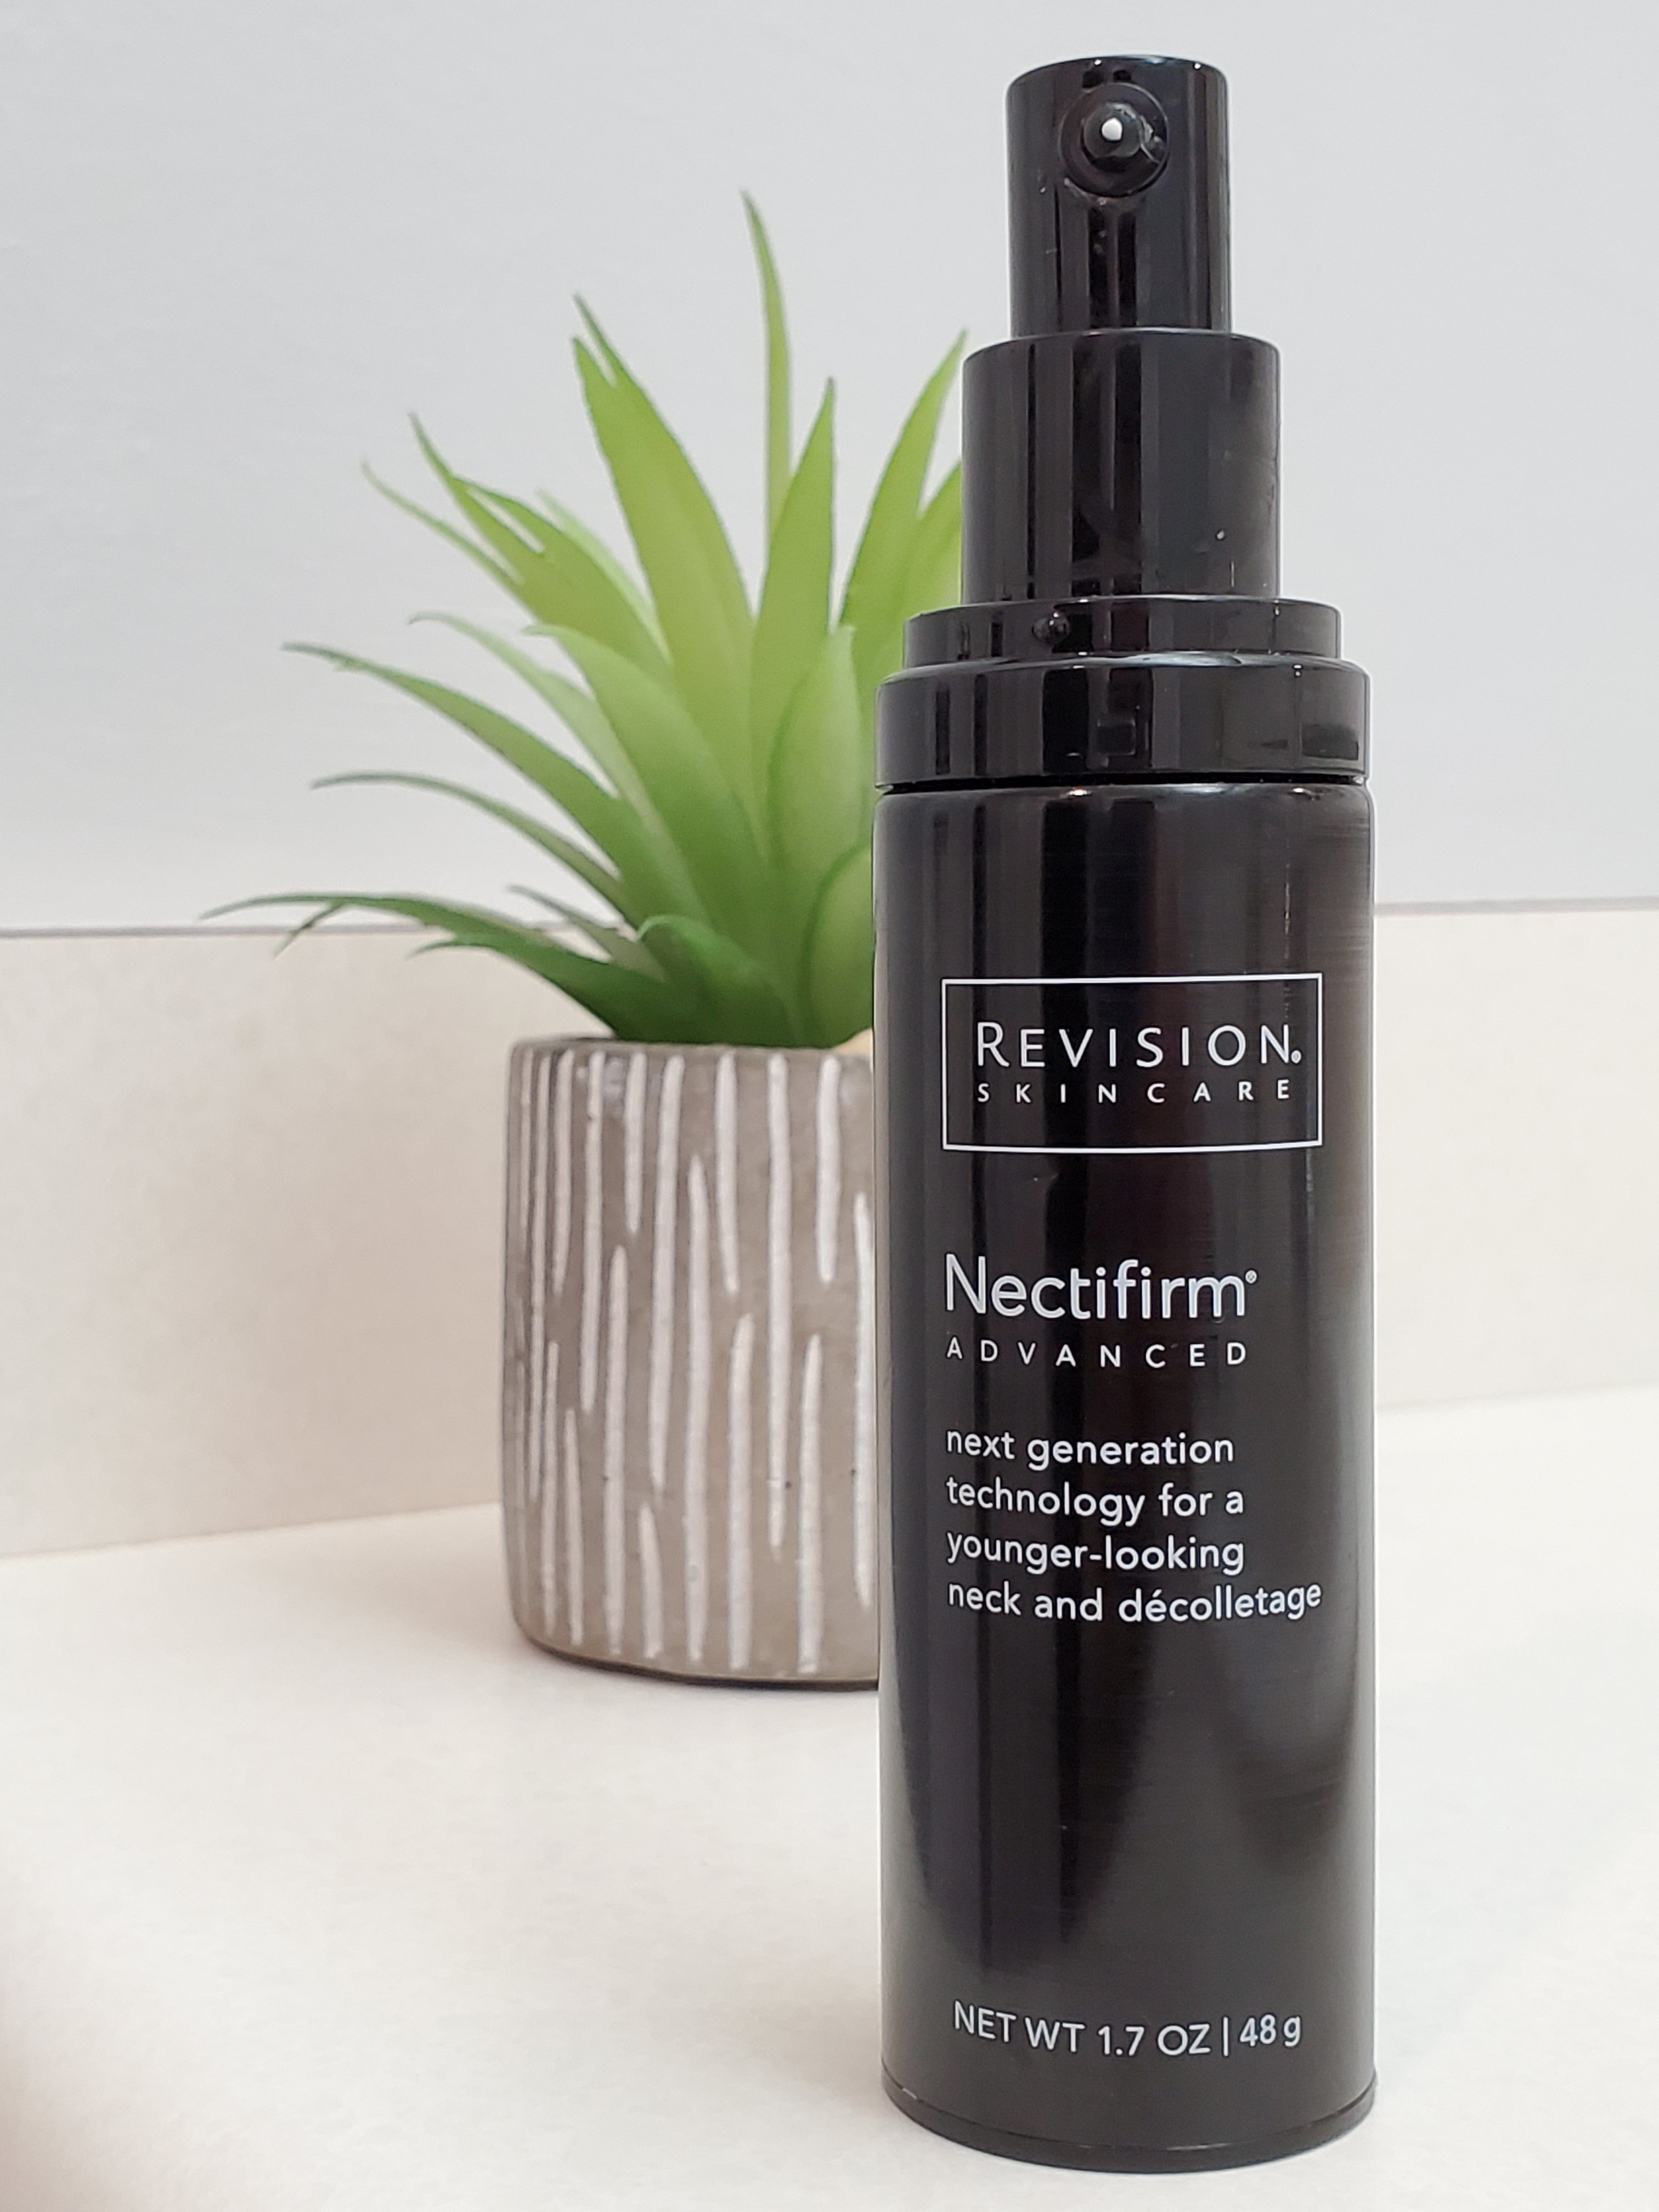 Revision Nectifirm Advanced